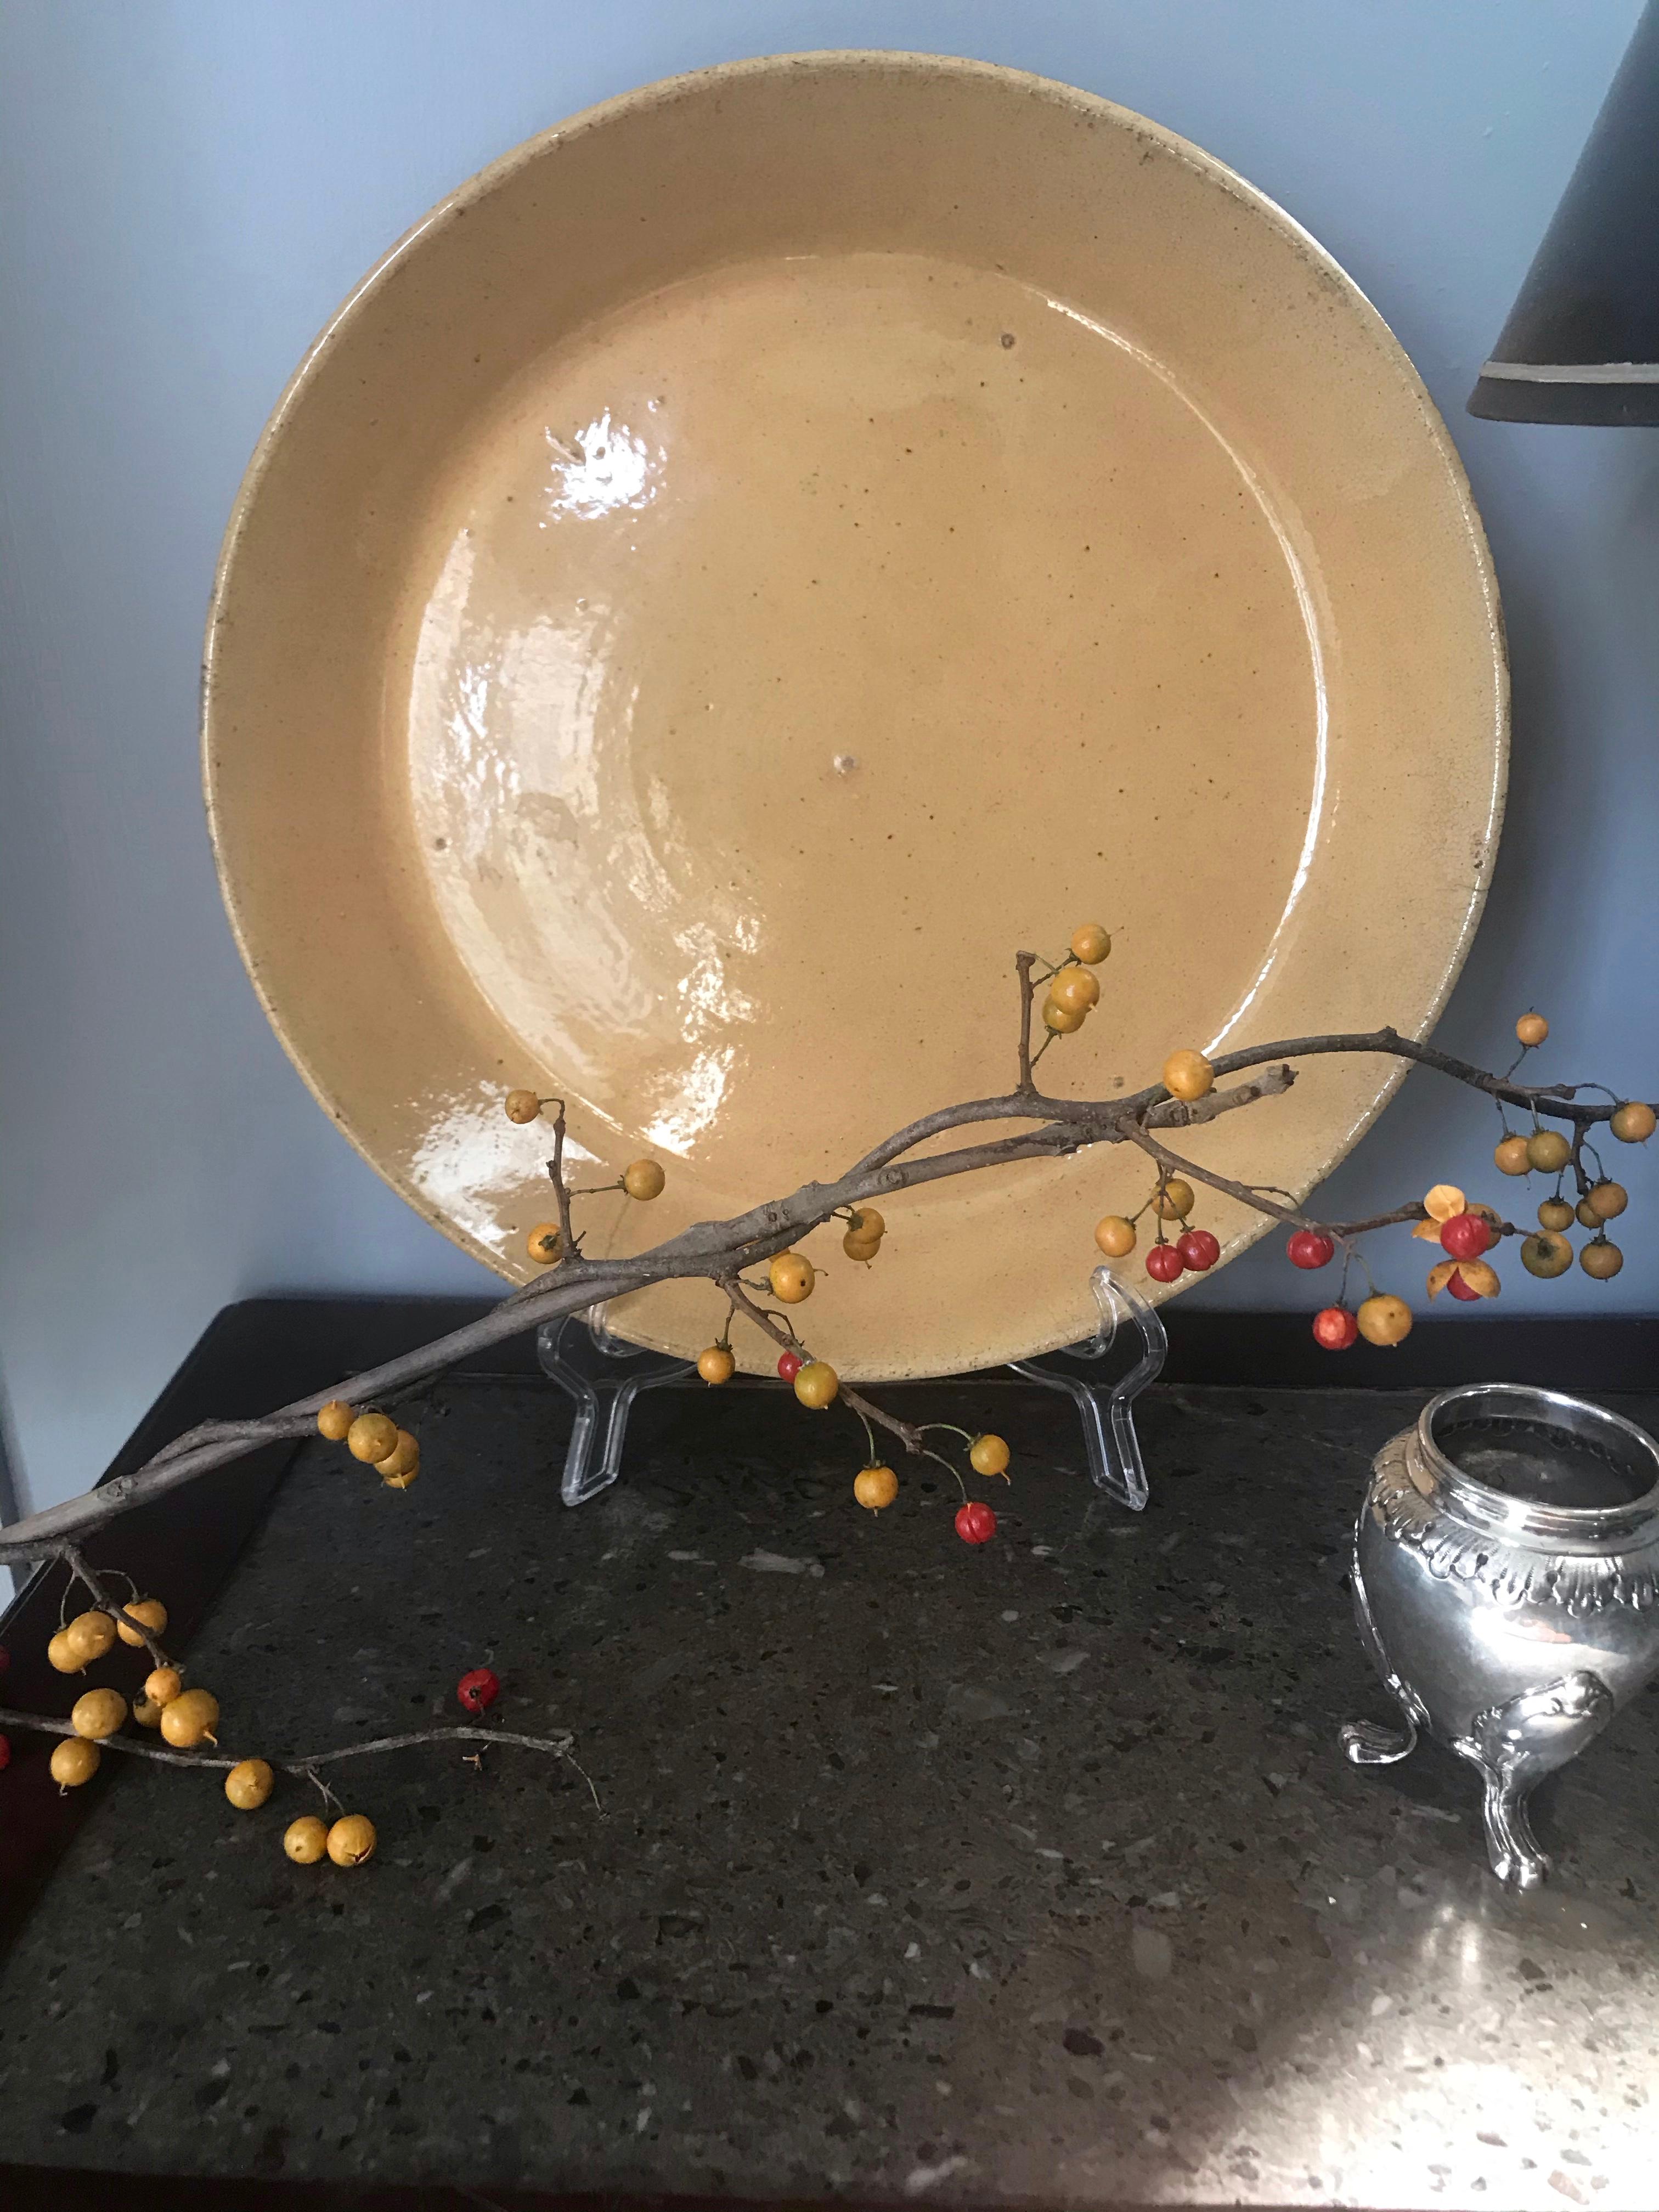 Yellow ware rimmed dish, American, 1830s. East coast New Jersey or Pennsylvania factory.
Dimensions: 11.38